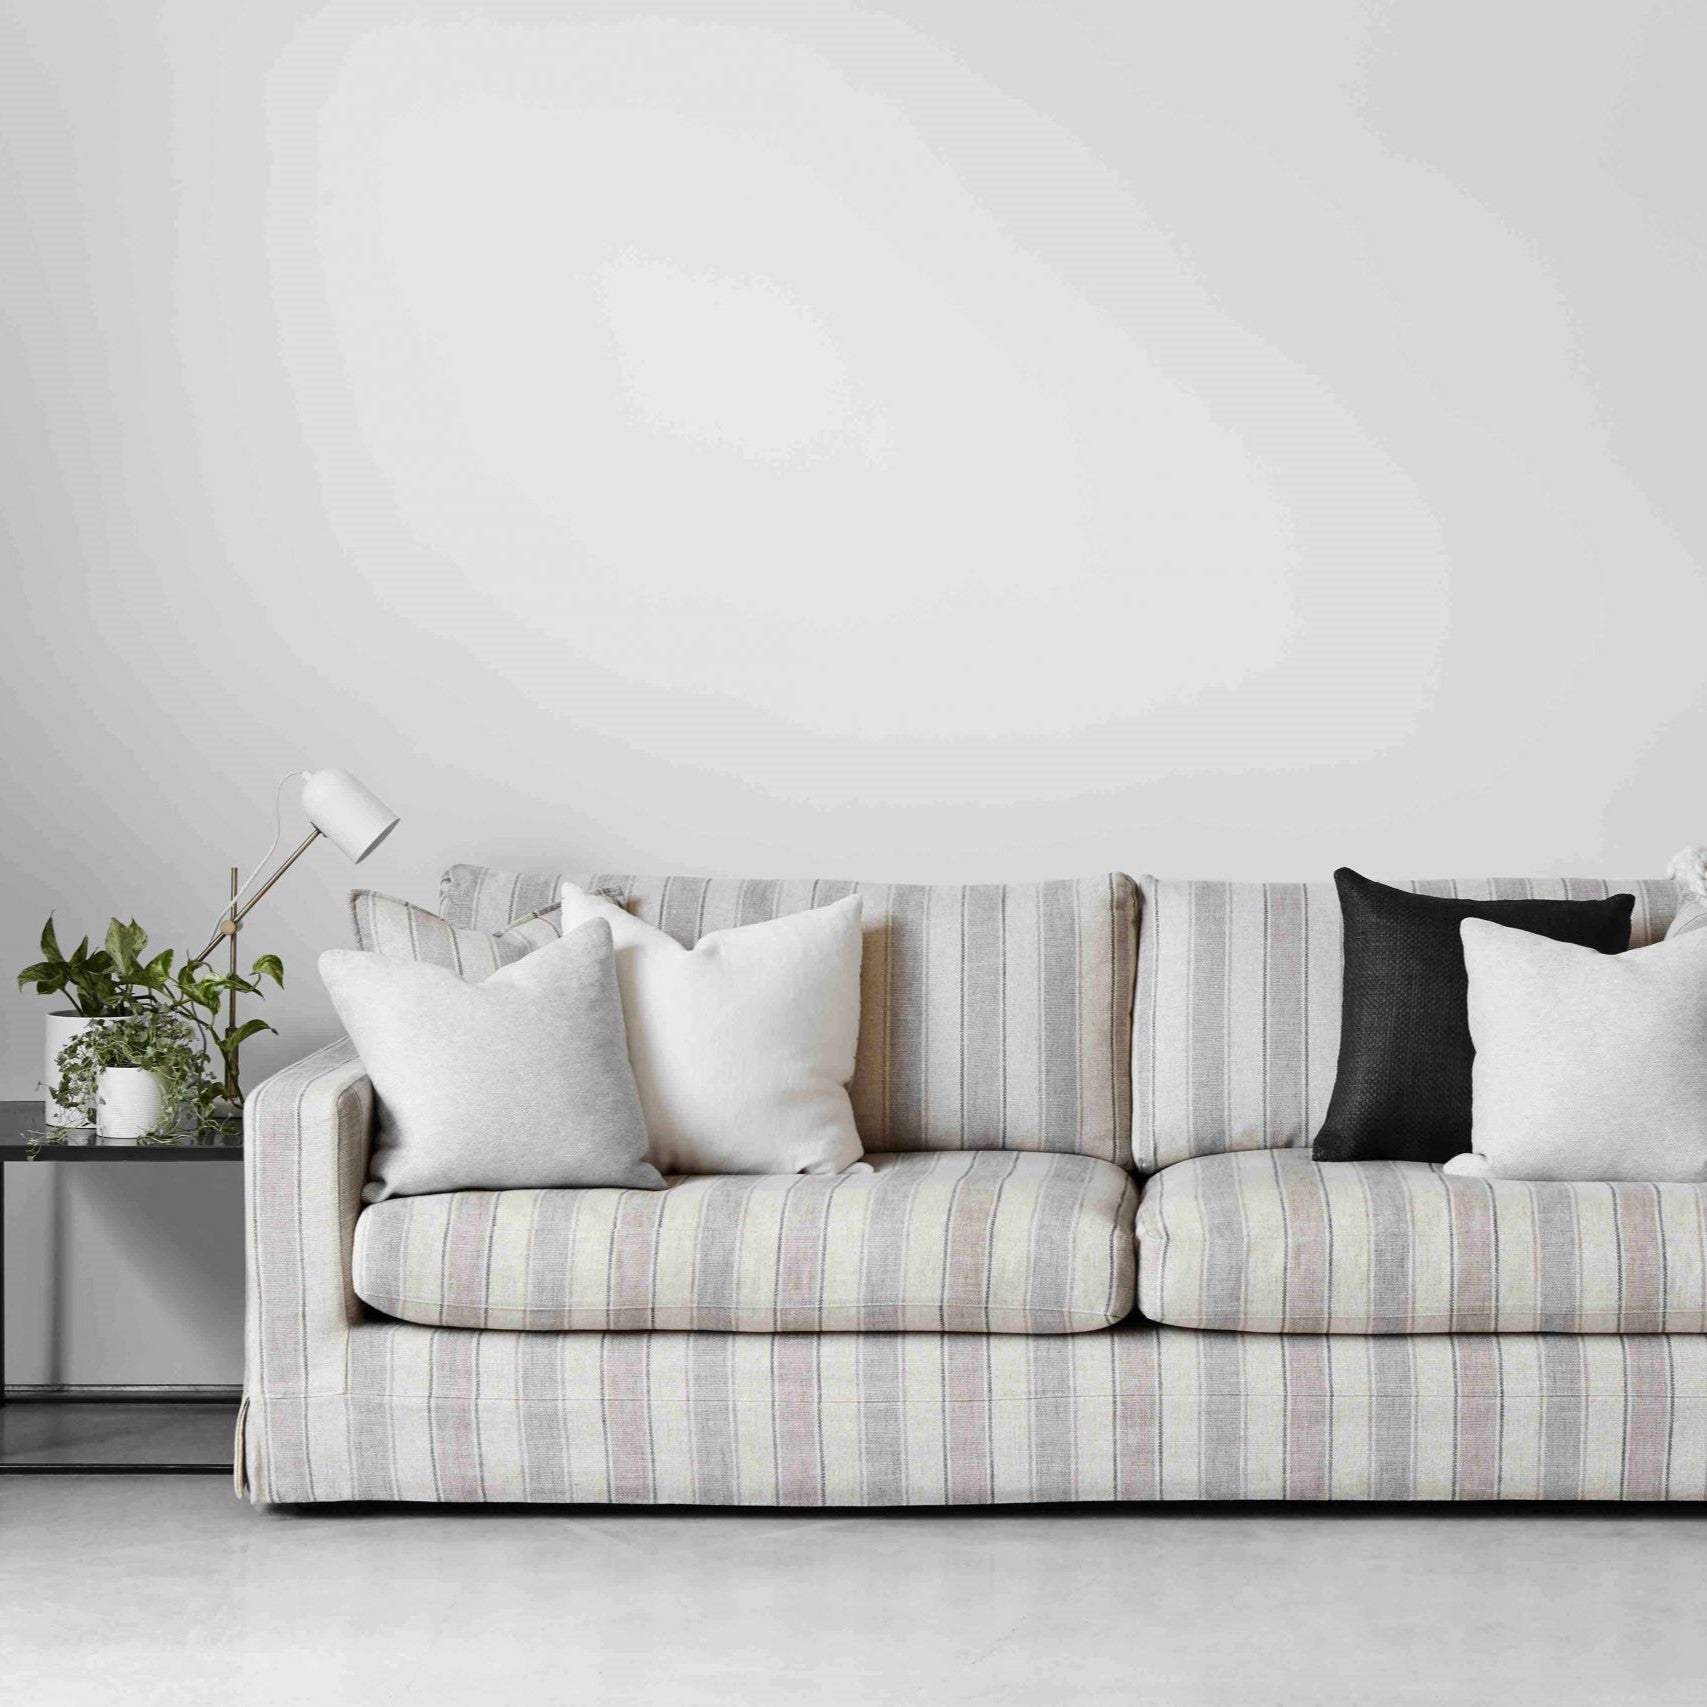 Sherman Loose Cover Sofa by Molmic available from Make Your House A Home, Furniture Store located in Bendigo, Victoria. Australian Made in Melbourne.